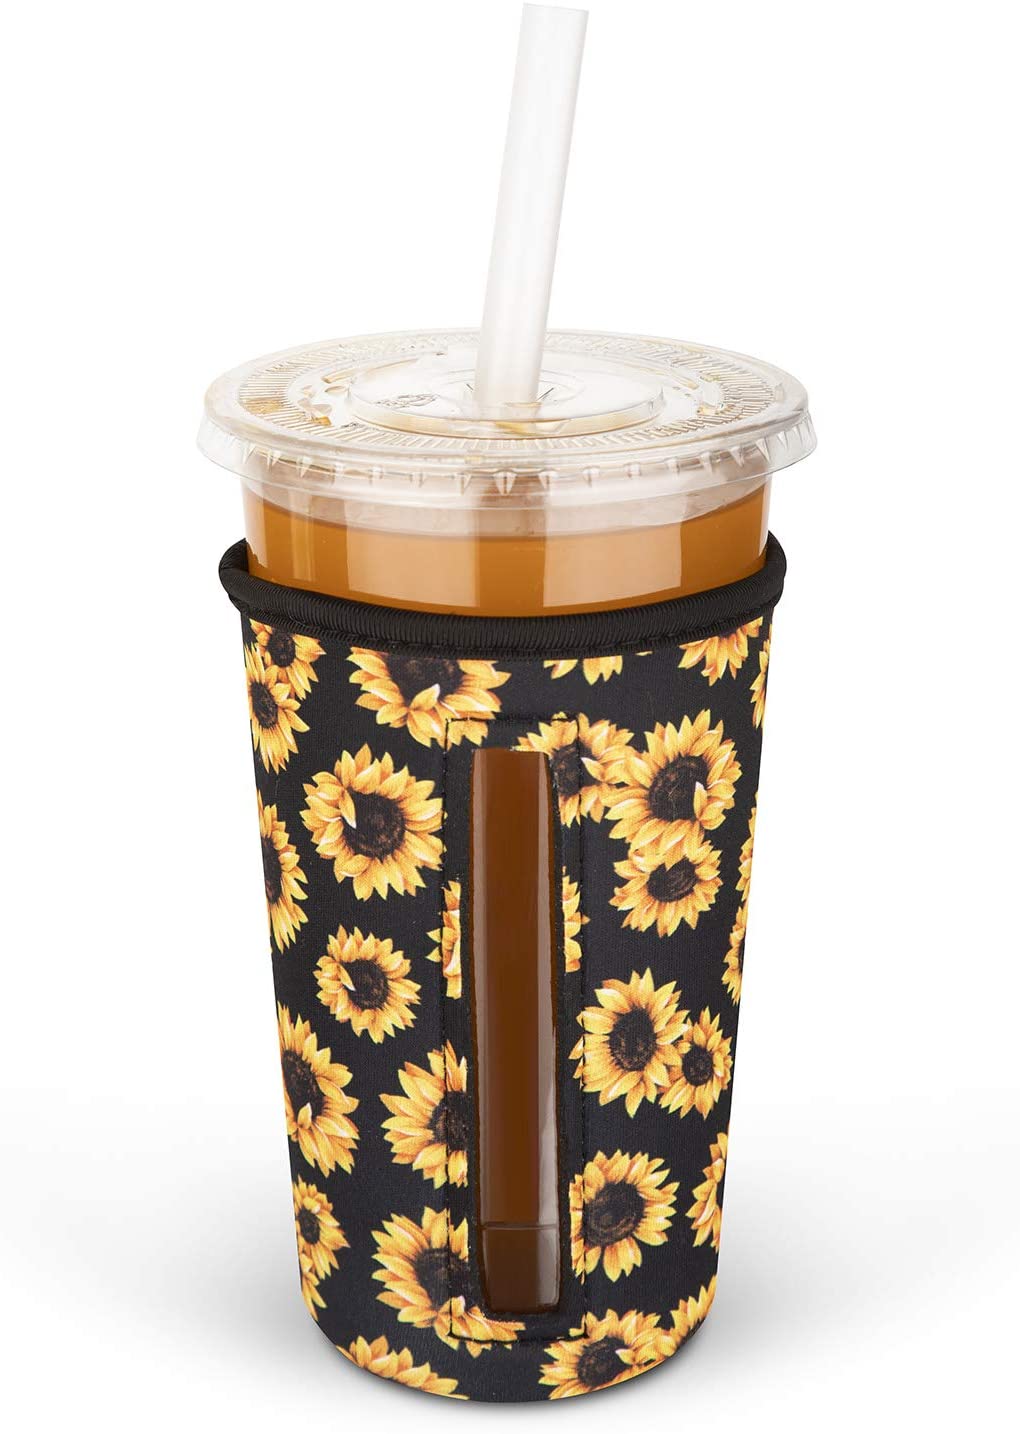 Black, Small Koffee Kover Insulated Neoprene Iced Beverage Sleeve for Starbucks Grande Dunkin Donuts Small and similar iced beverage cups